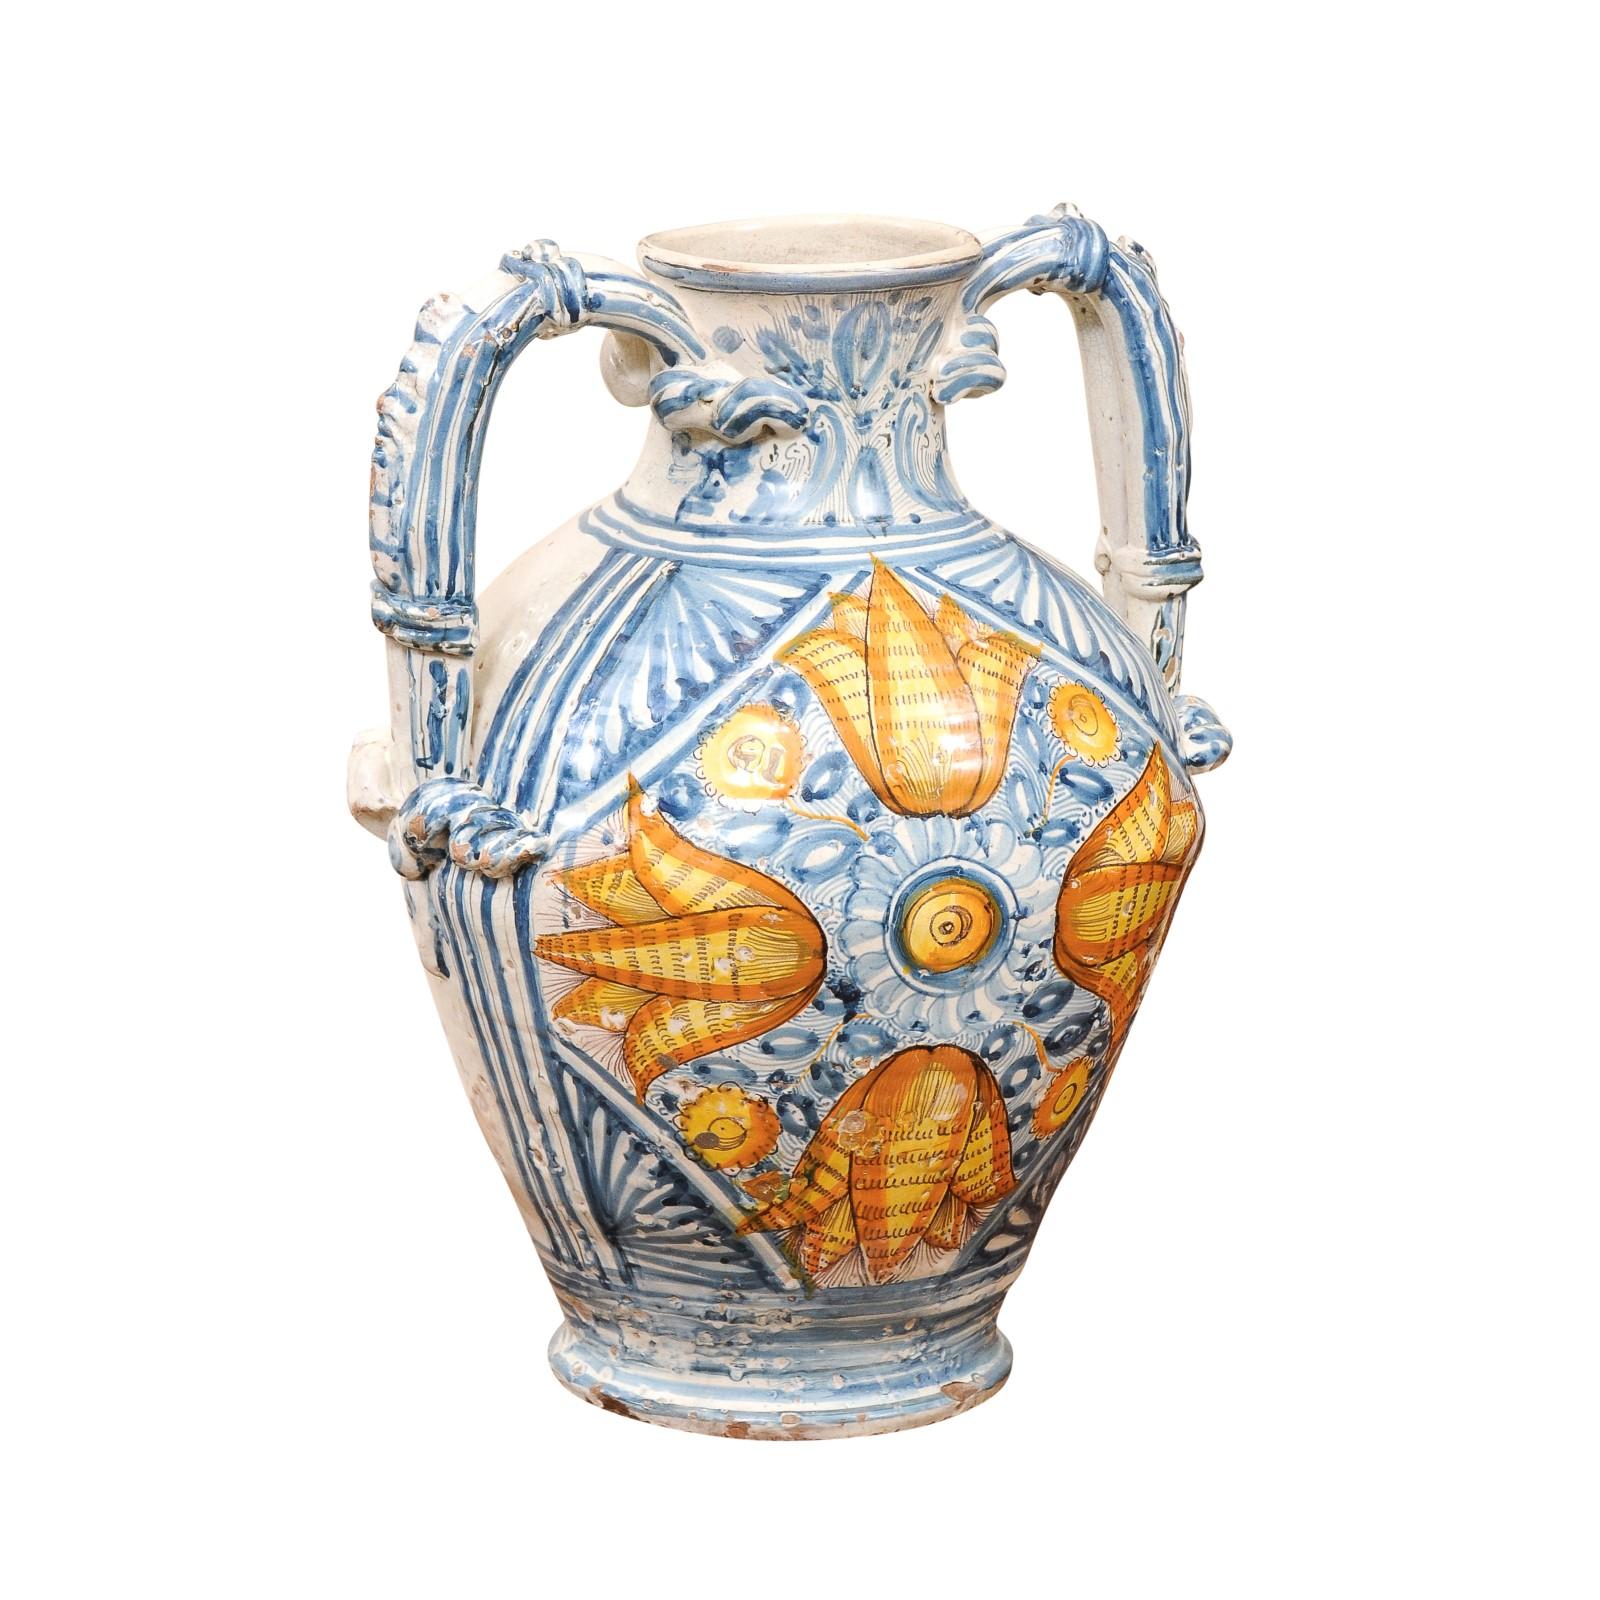 Large 18th Century Italian Faience Vase with Handles In Good Condition For Sale In Atlanta, GA